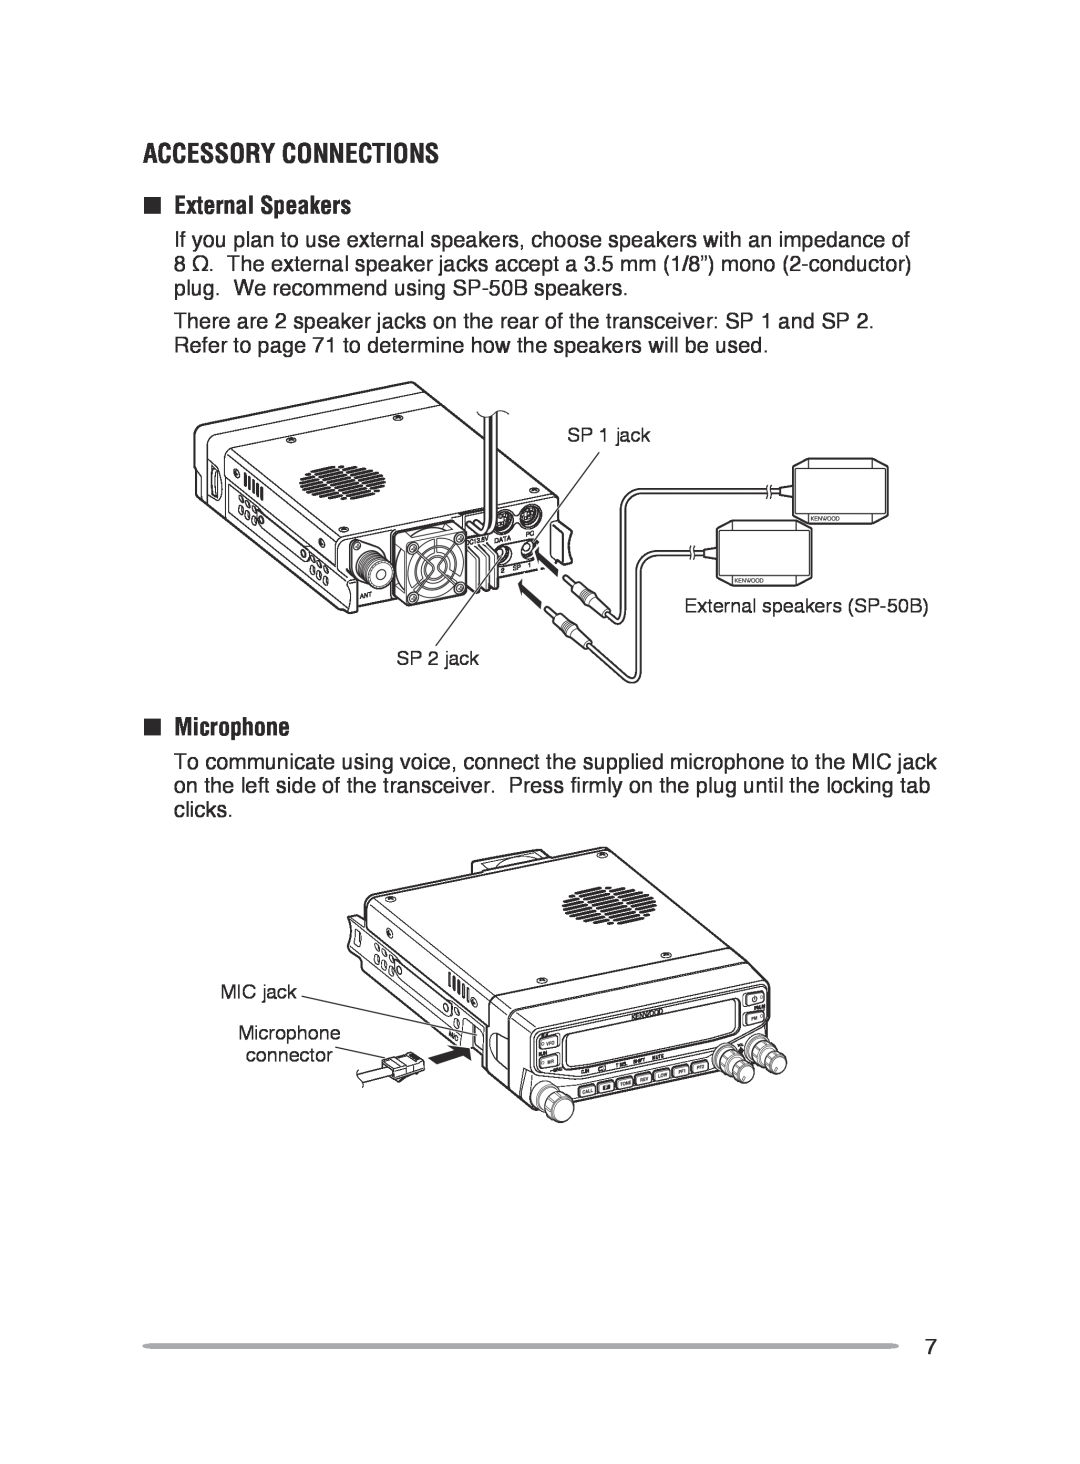 Kenwood TM-V71A, TM-V71E instruction manual Accessory Connections, nExternal Speakers, nMicrophone 